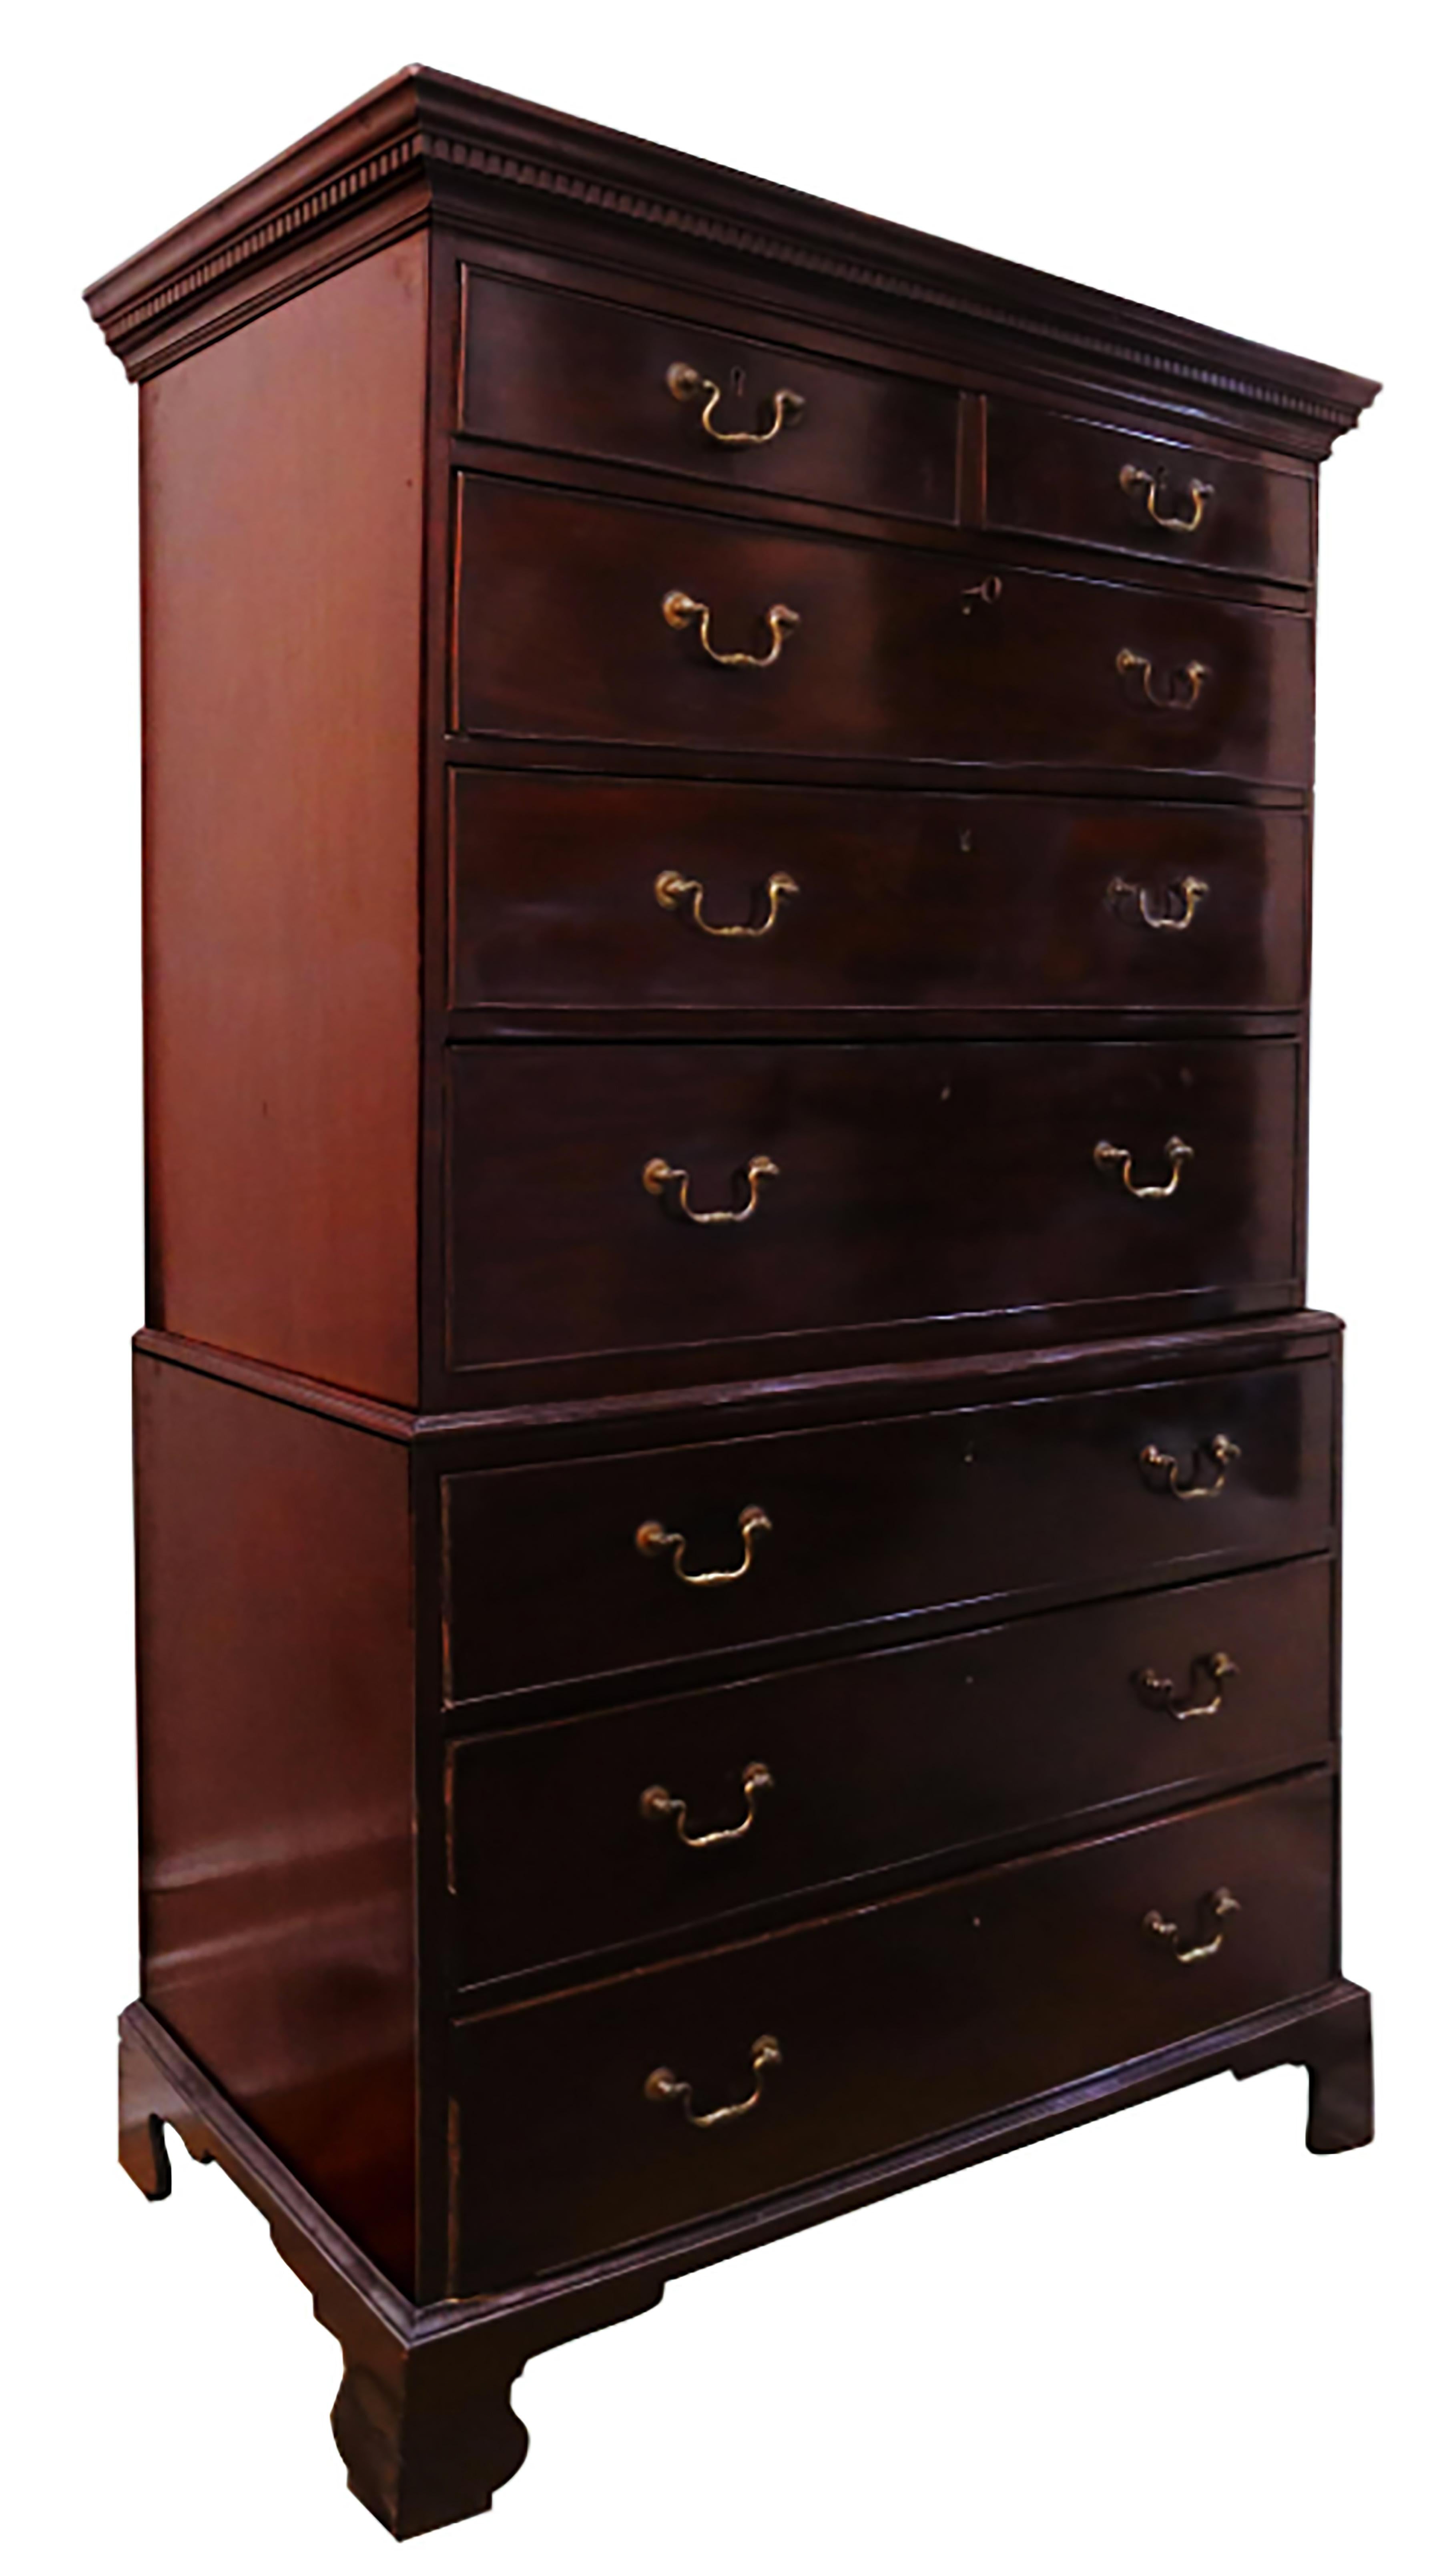 A handsome, richly colored chest on chest in Cuban mahogany. The lower case rests on bracket feet with three graduated drawers with cock beaded edges on both upper and lower cases. The commodious drawers are composed of dovetailed pine secondary